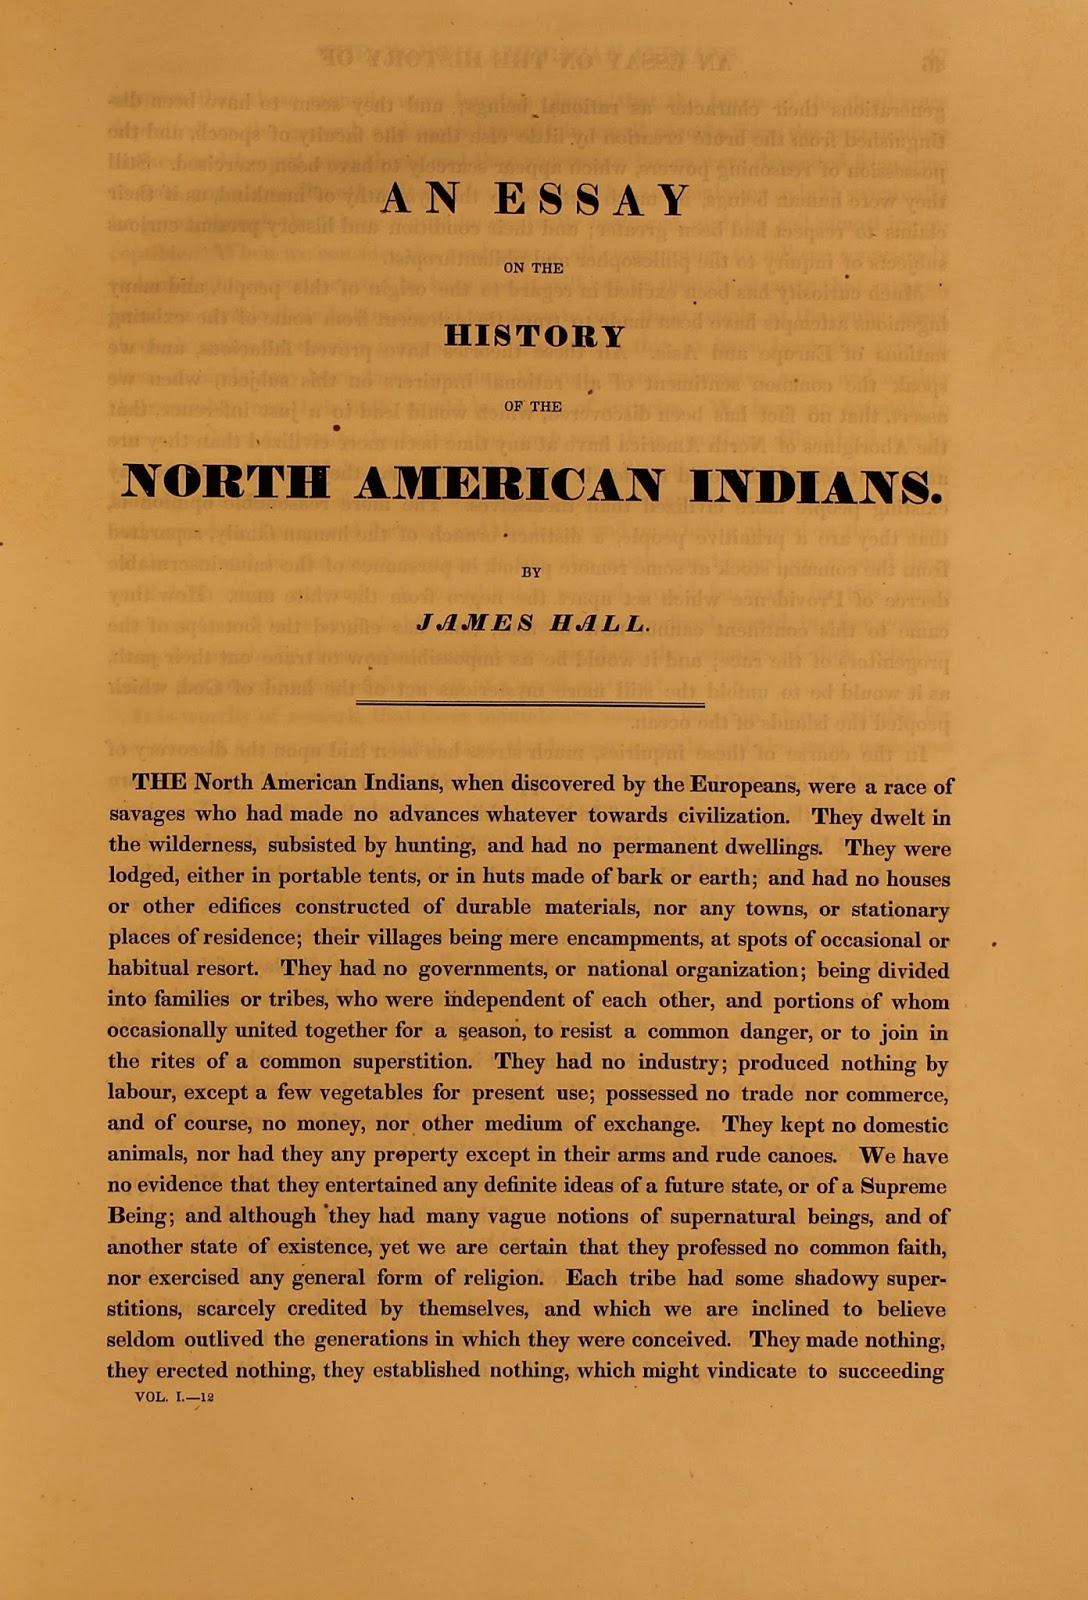 First page of "An Essay on the History of the Indians" by James Hall